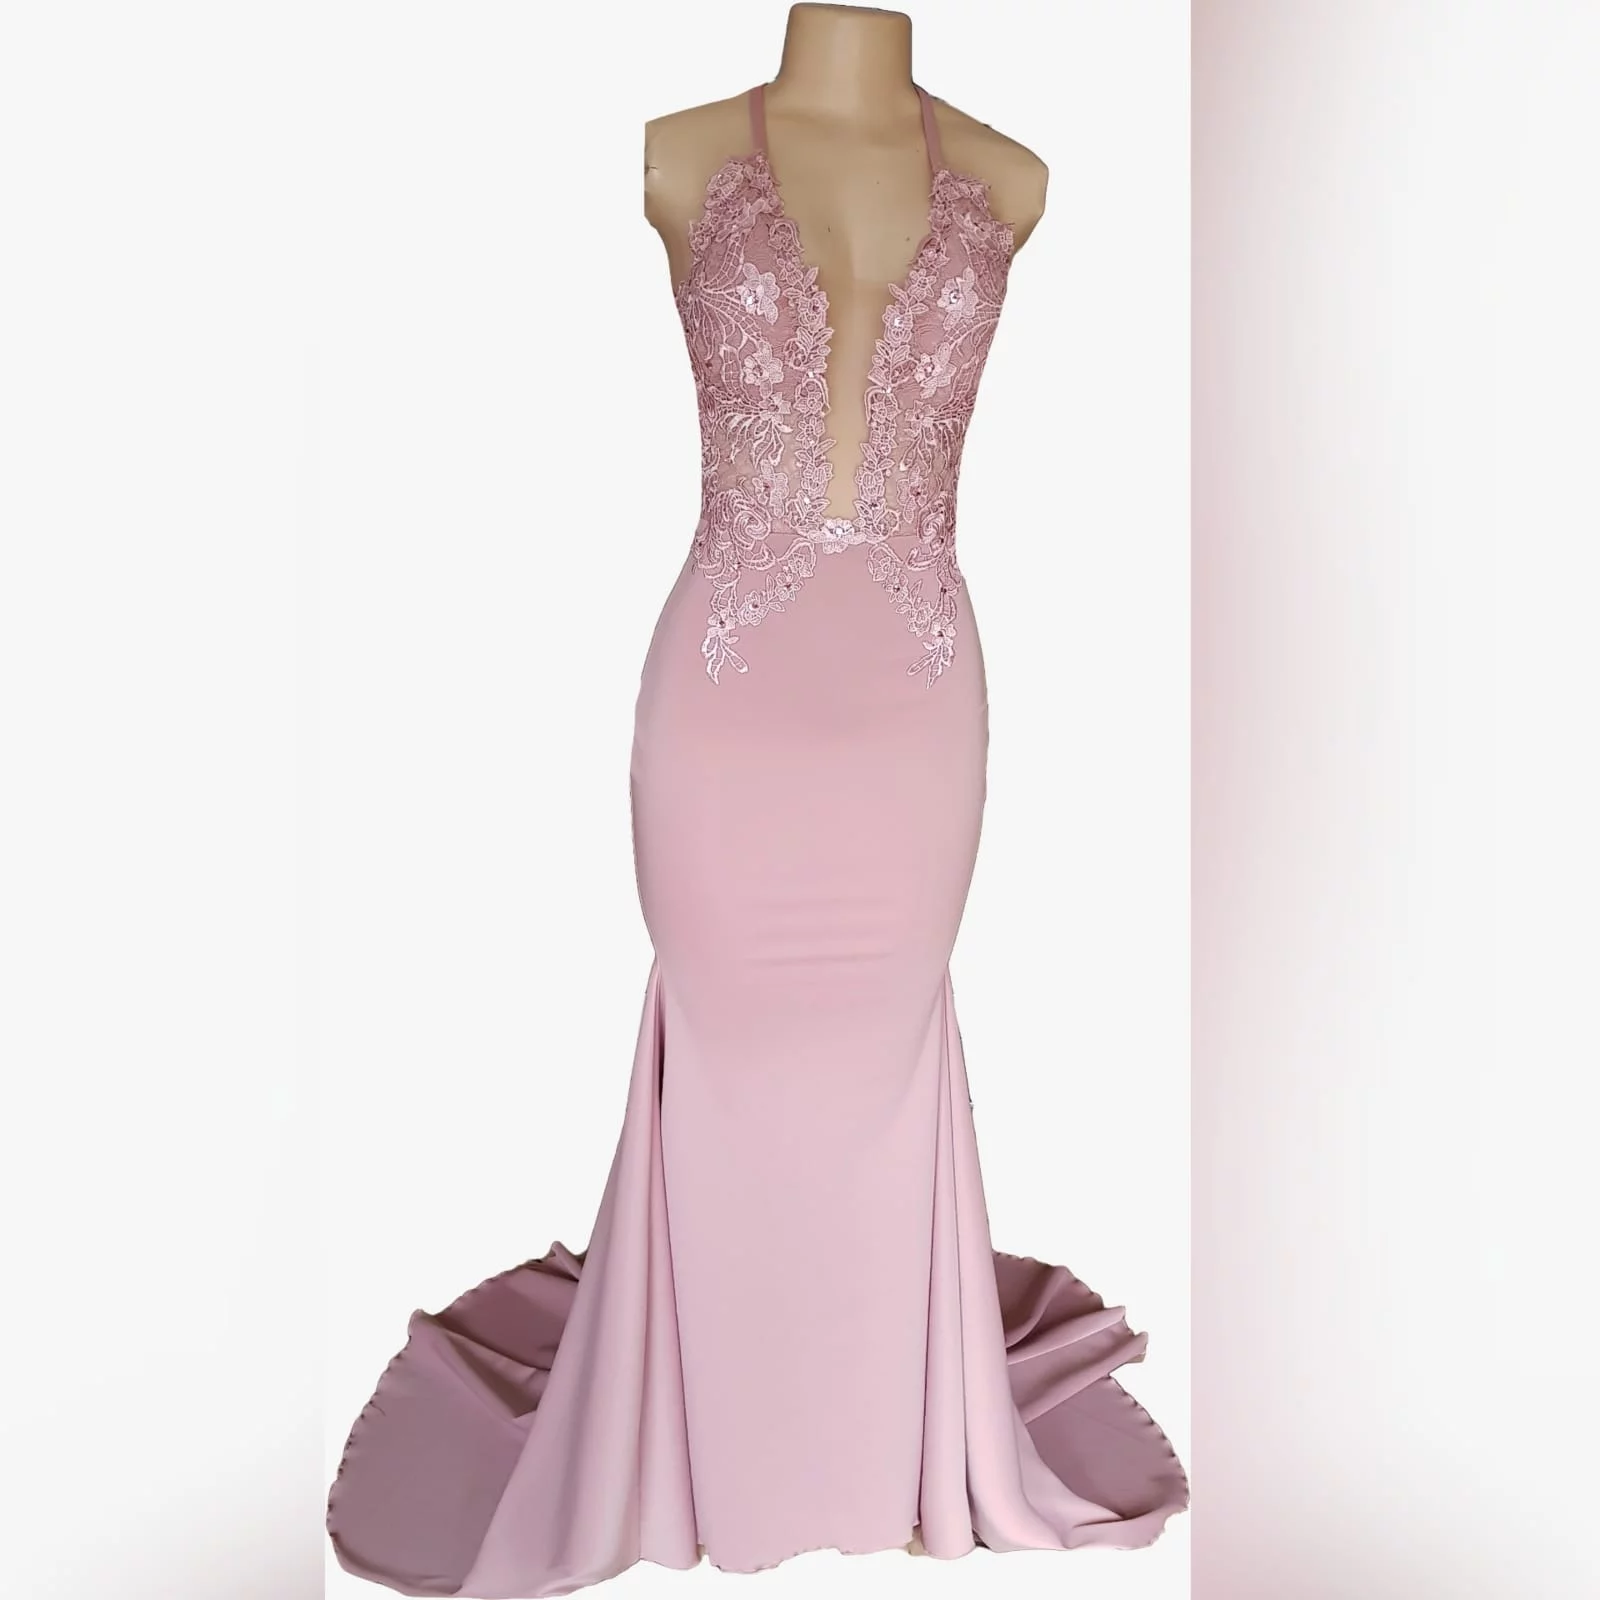 Pink sexy soft mermaid matric dance dress 6 look ravishing on your prom night with this pink sexy soft mermaid pink sexy soft mermaid matric dance dress. A fitted lace bodice with a plunging neckline, low back and a train to add some glamour to your important event.